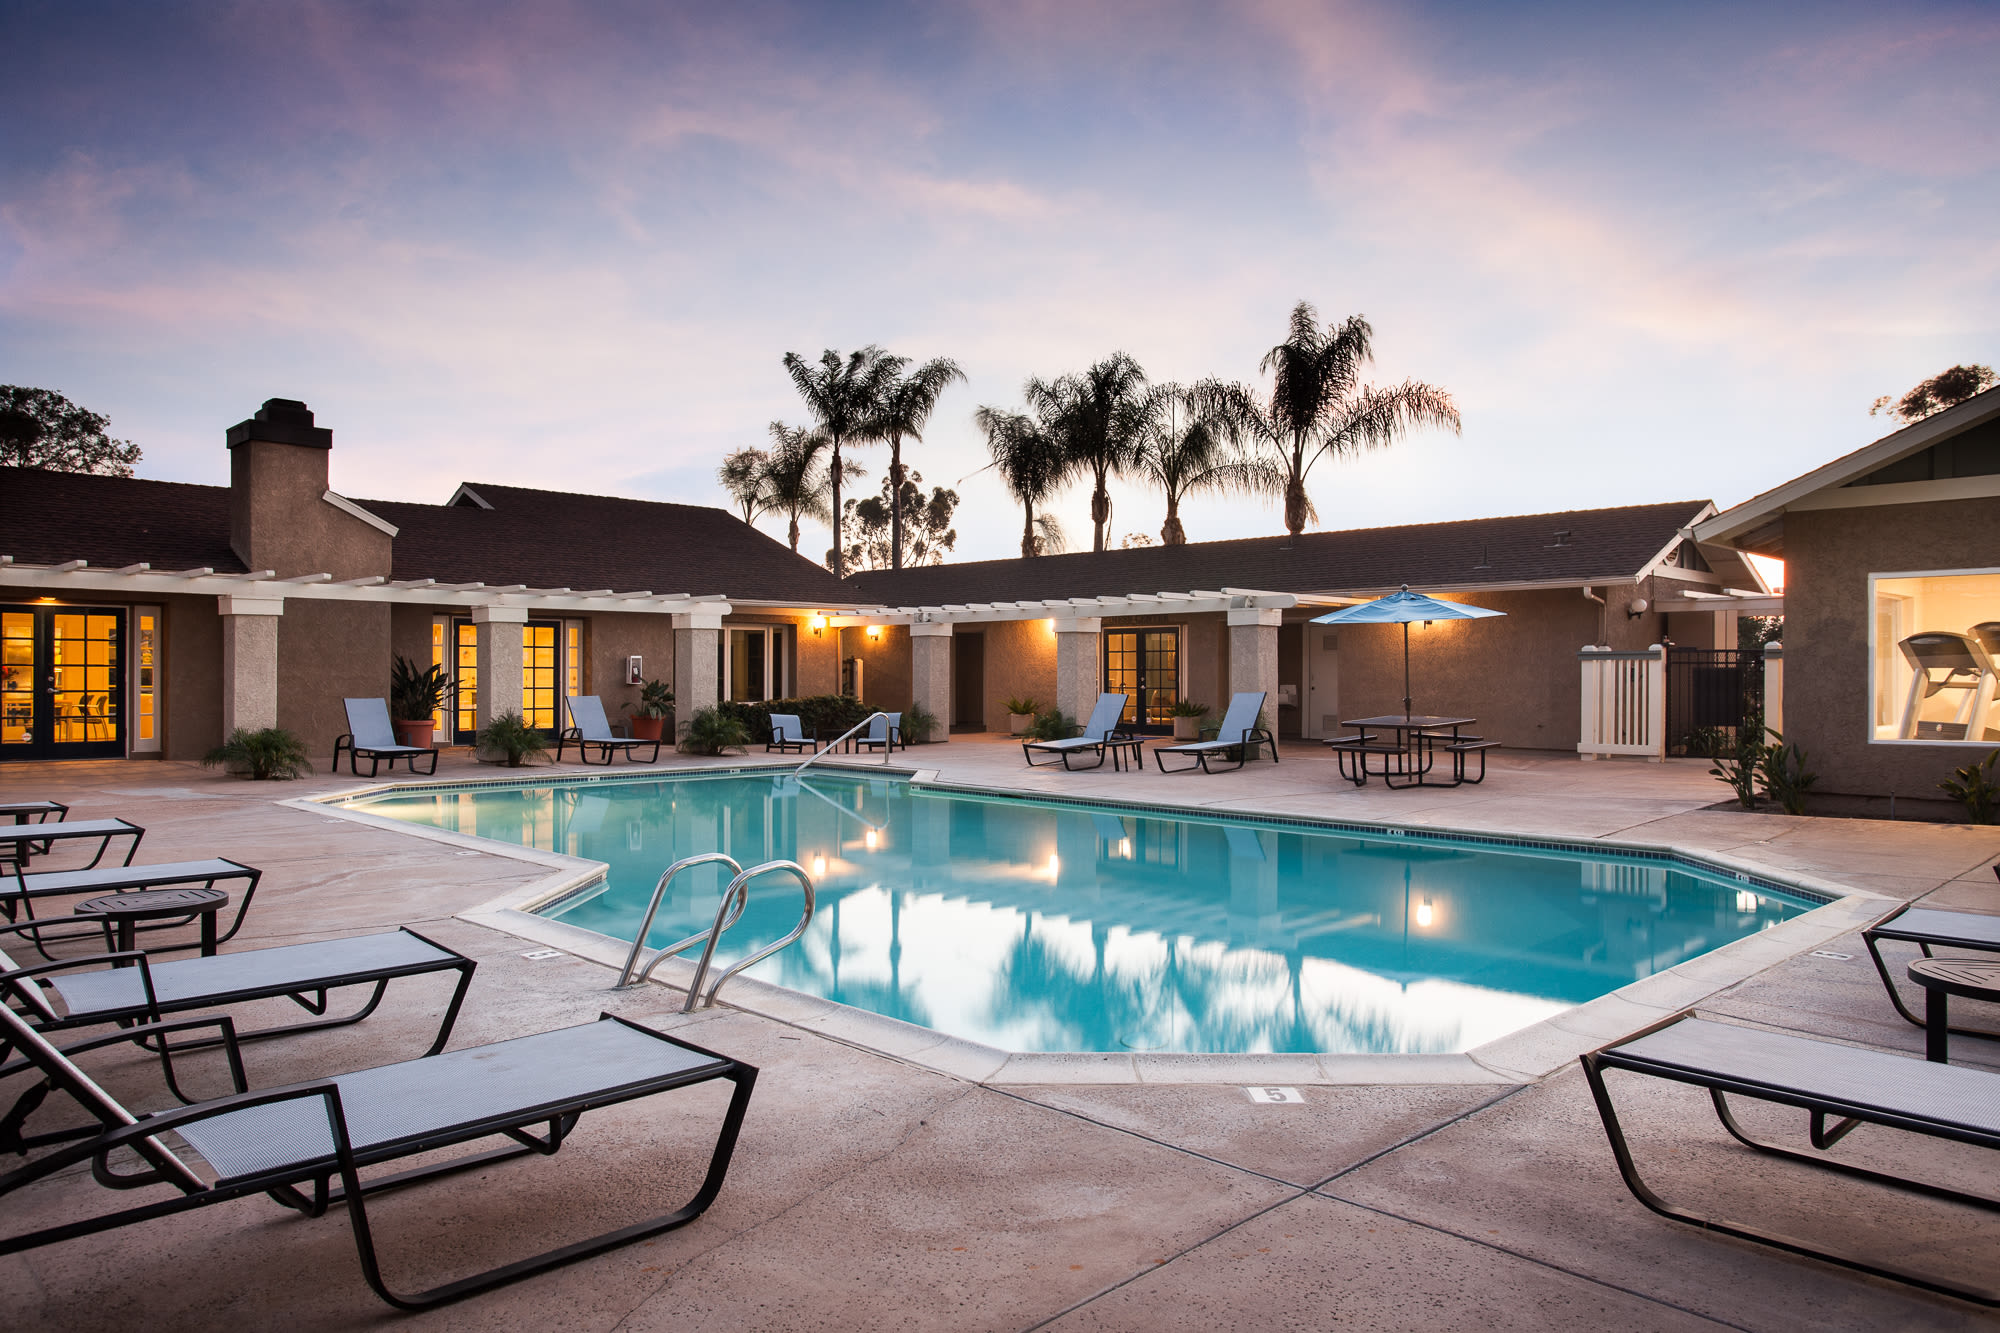 Spring Valley, CA Apartments near San Diego | Lakeview Village